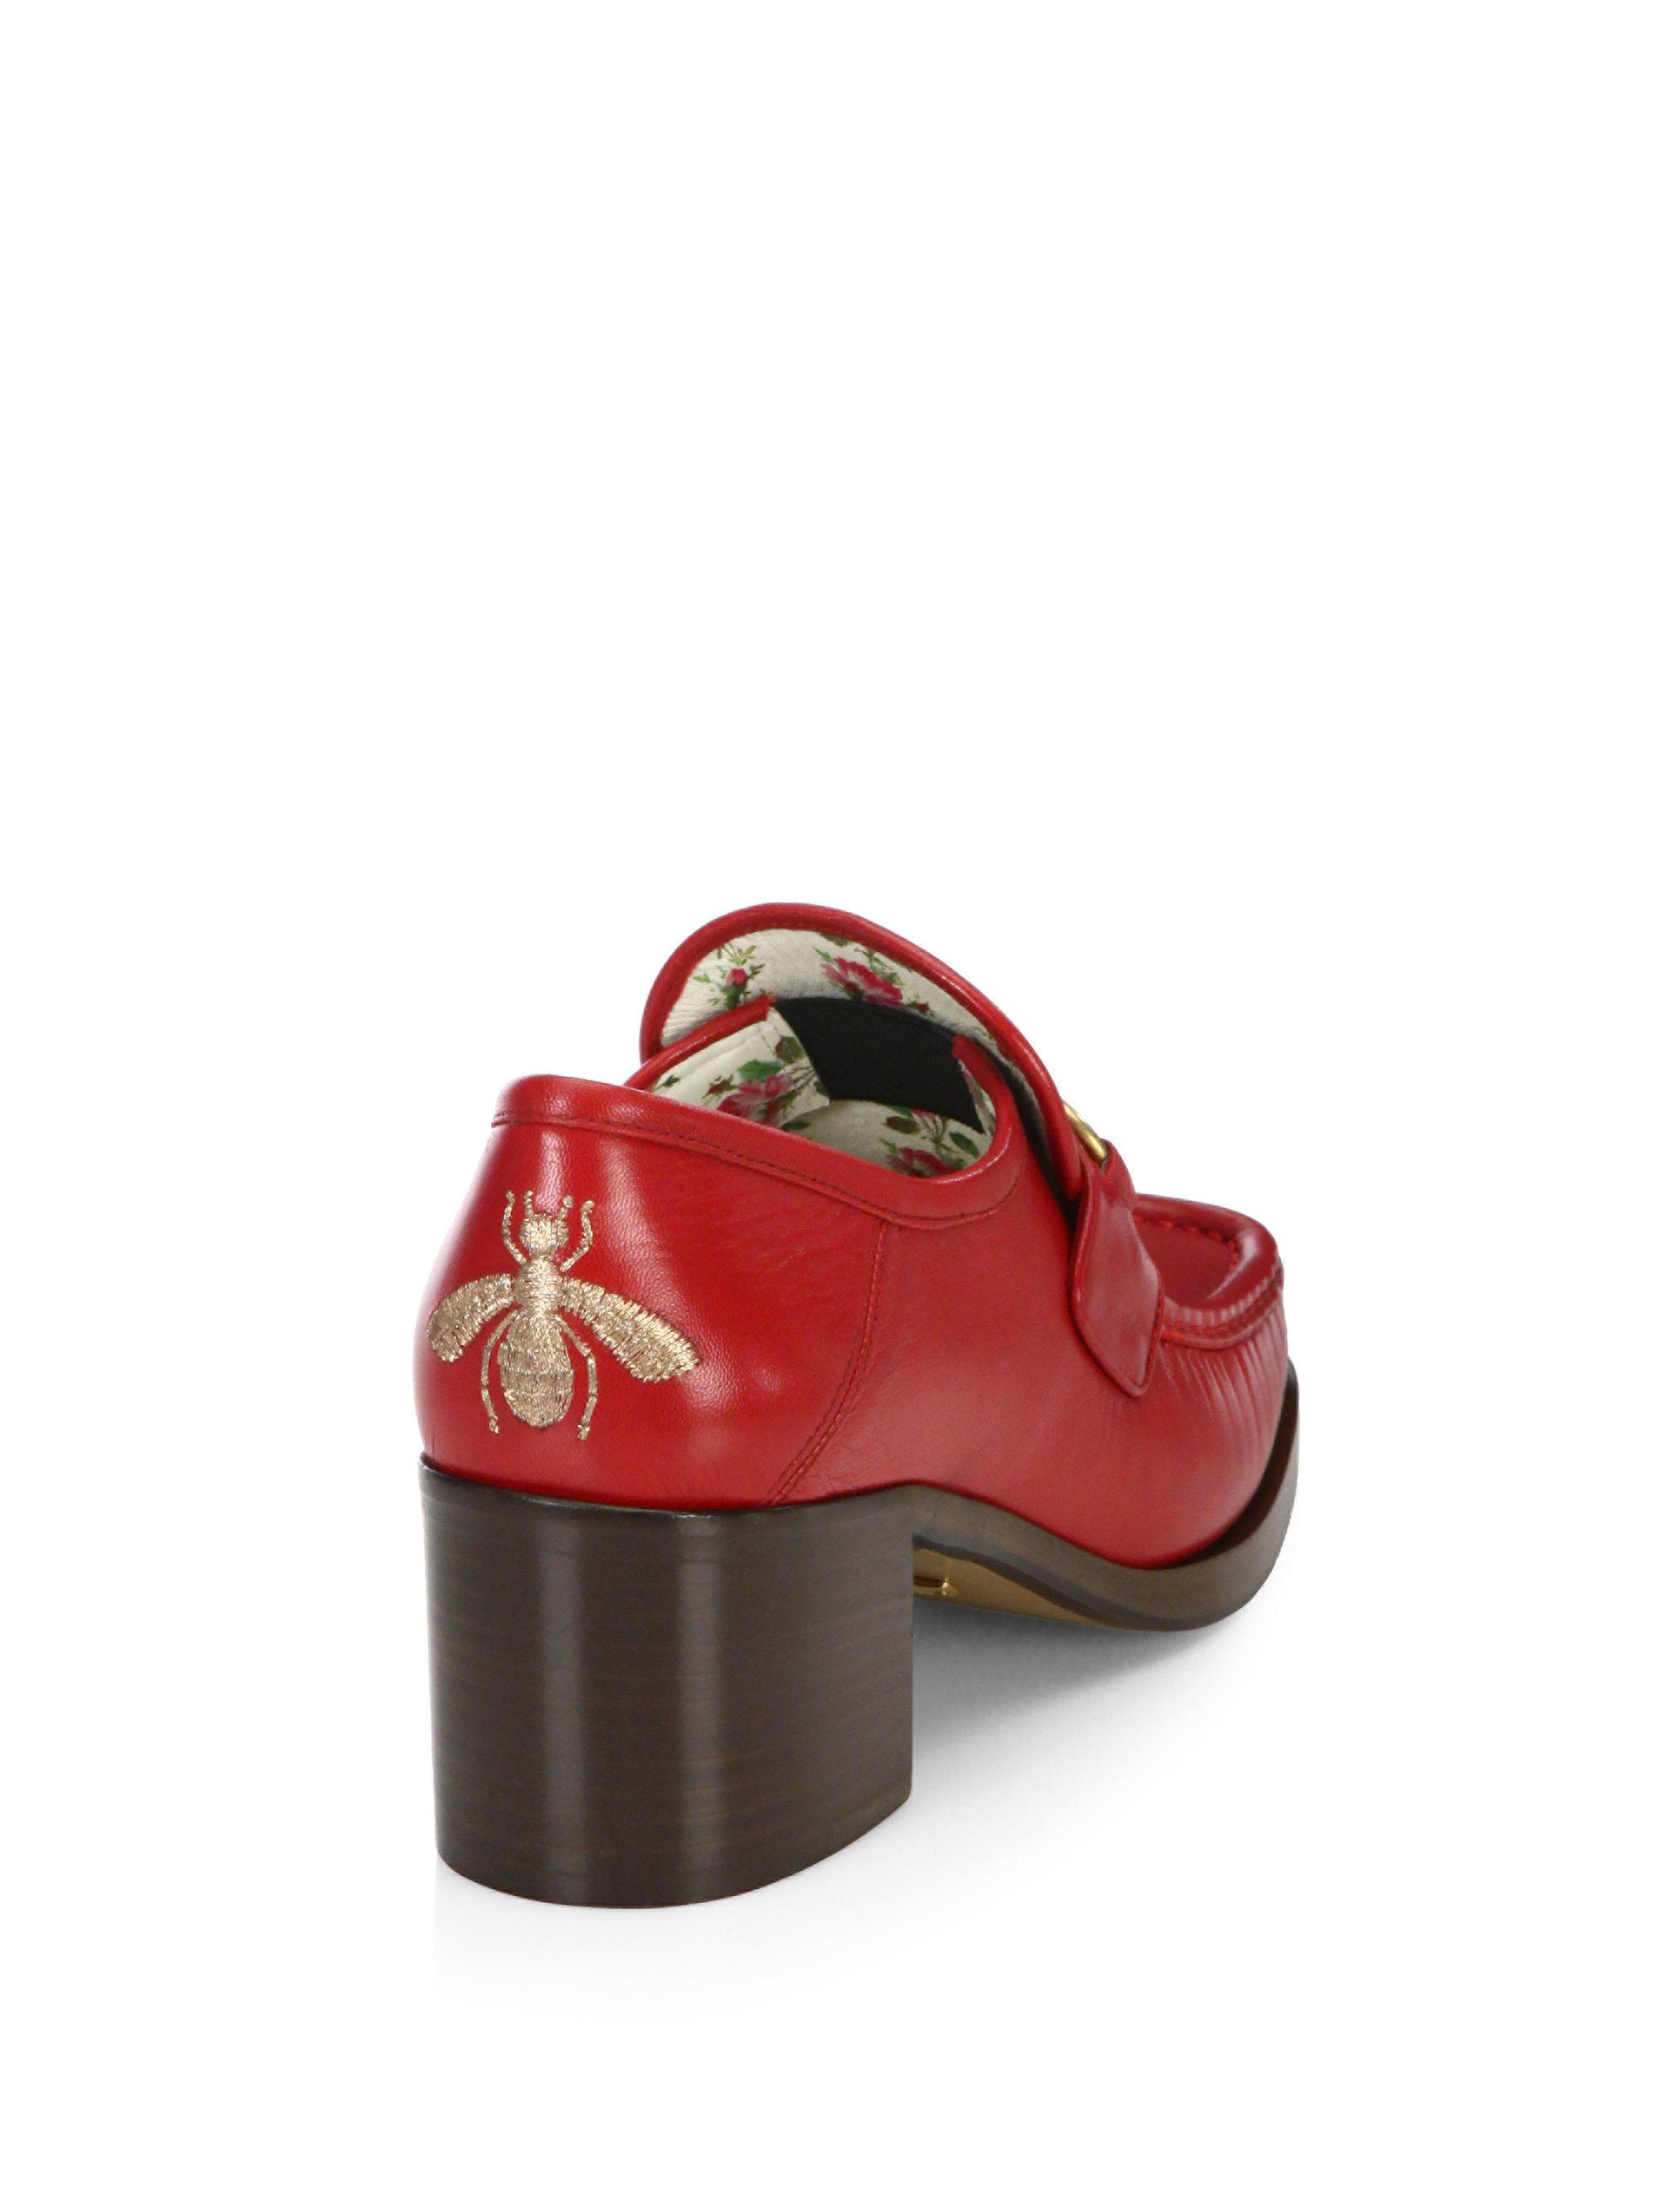 gucci loafers women red